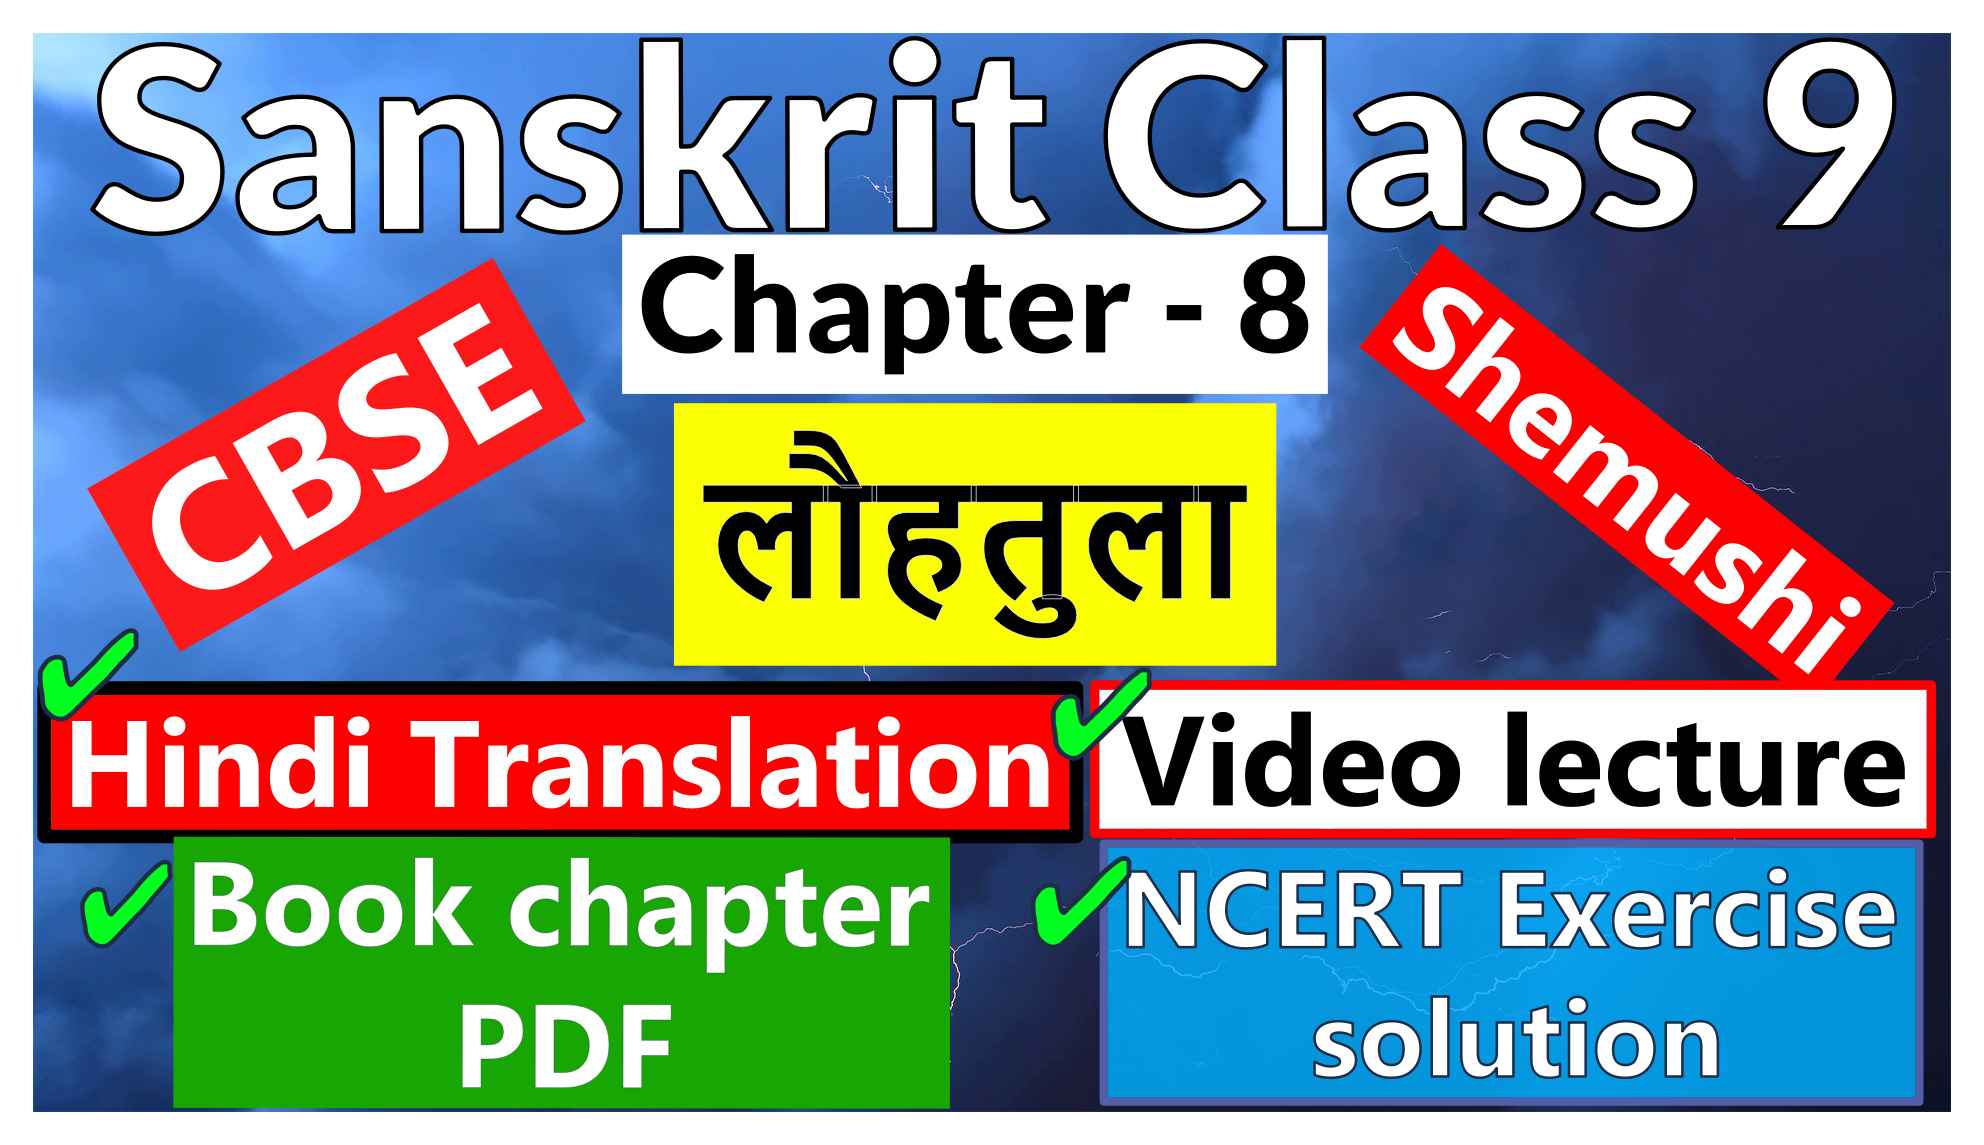 Sanskrit Class 9-Chapter 8 लौहतुला- Hindi Translation, Video lecture, NCERT Exercise solution (Question-Answer), Book chapter PDF